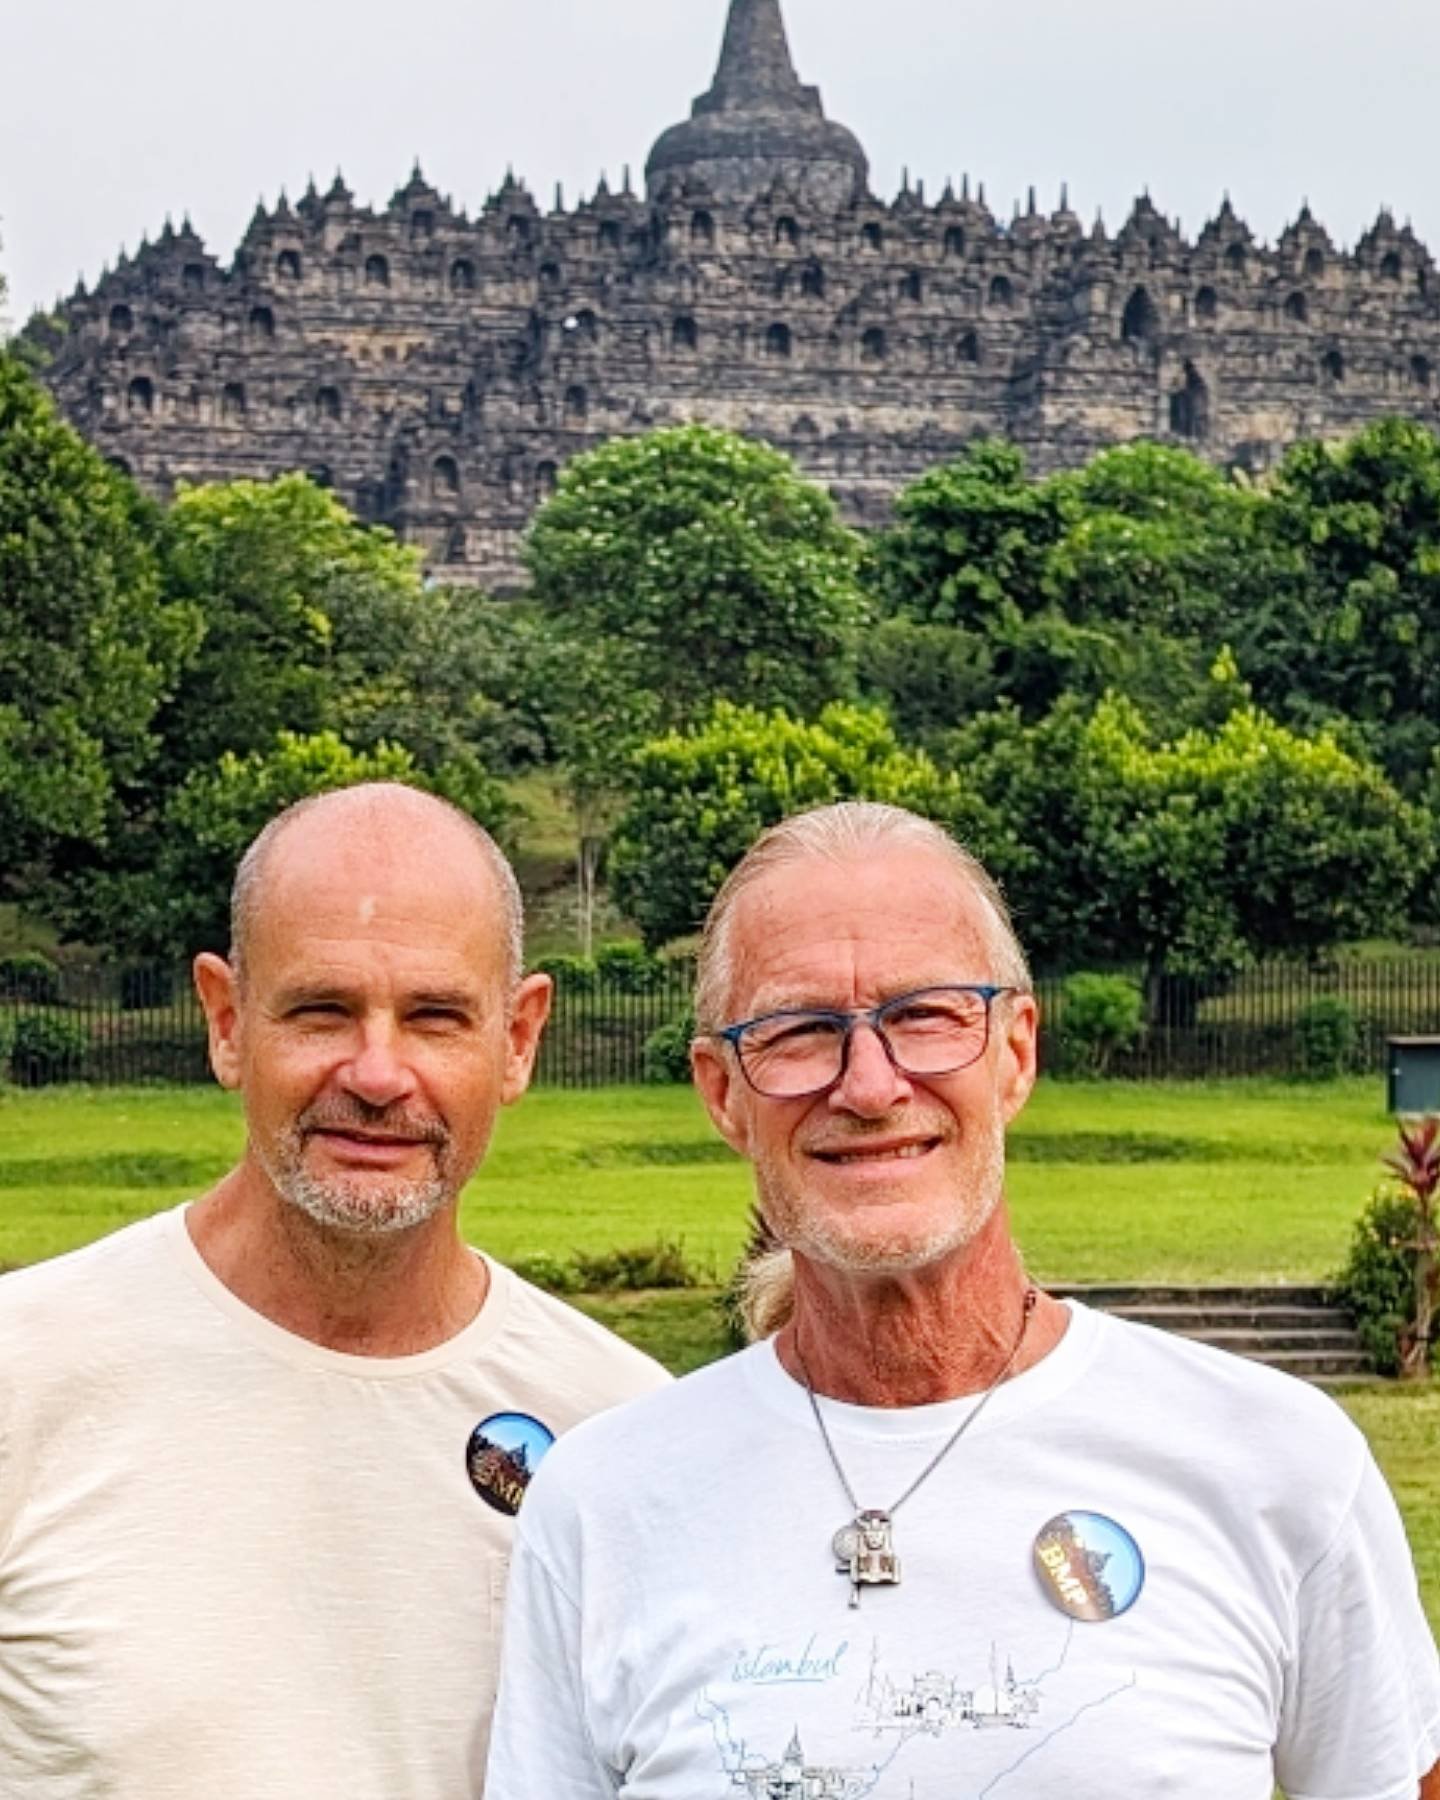 We just visited the largest Buddhist temple in the world! Built in the 8th century by the same cultural impulse that went on to build Angkor Wat, the Borobudur temple seen from above looks like a familiar Tibetan mandala. Amazing! We spent a day walk